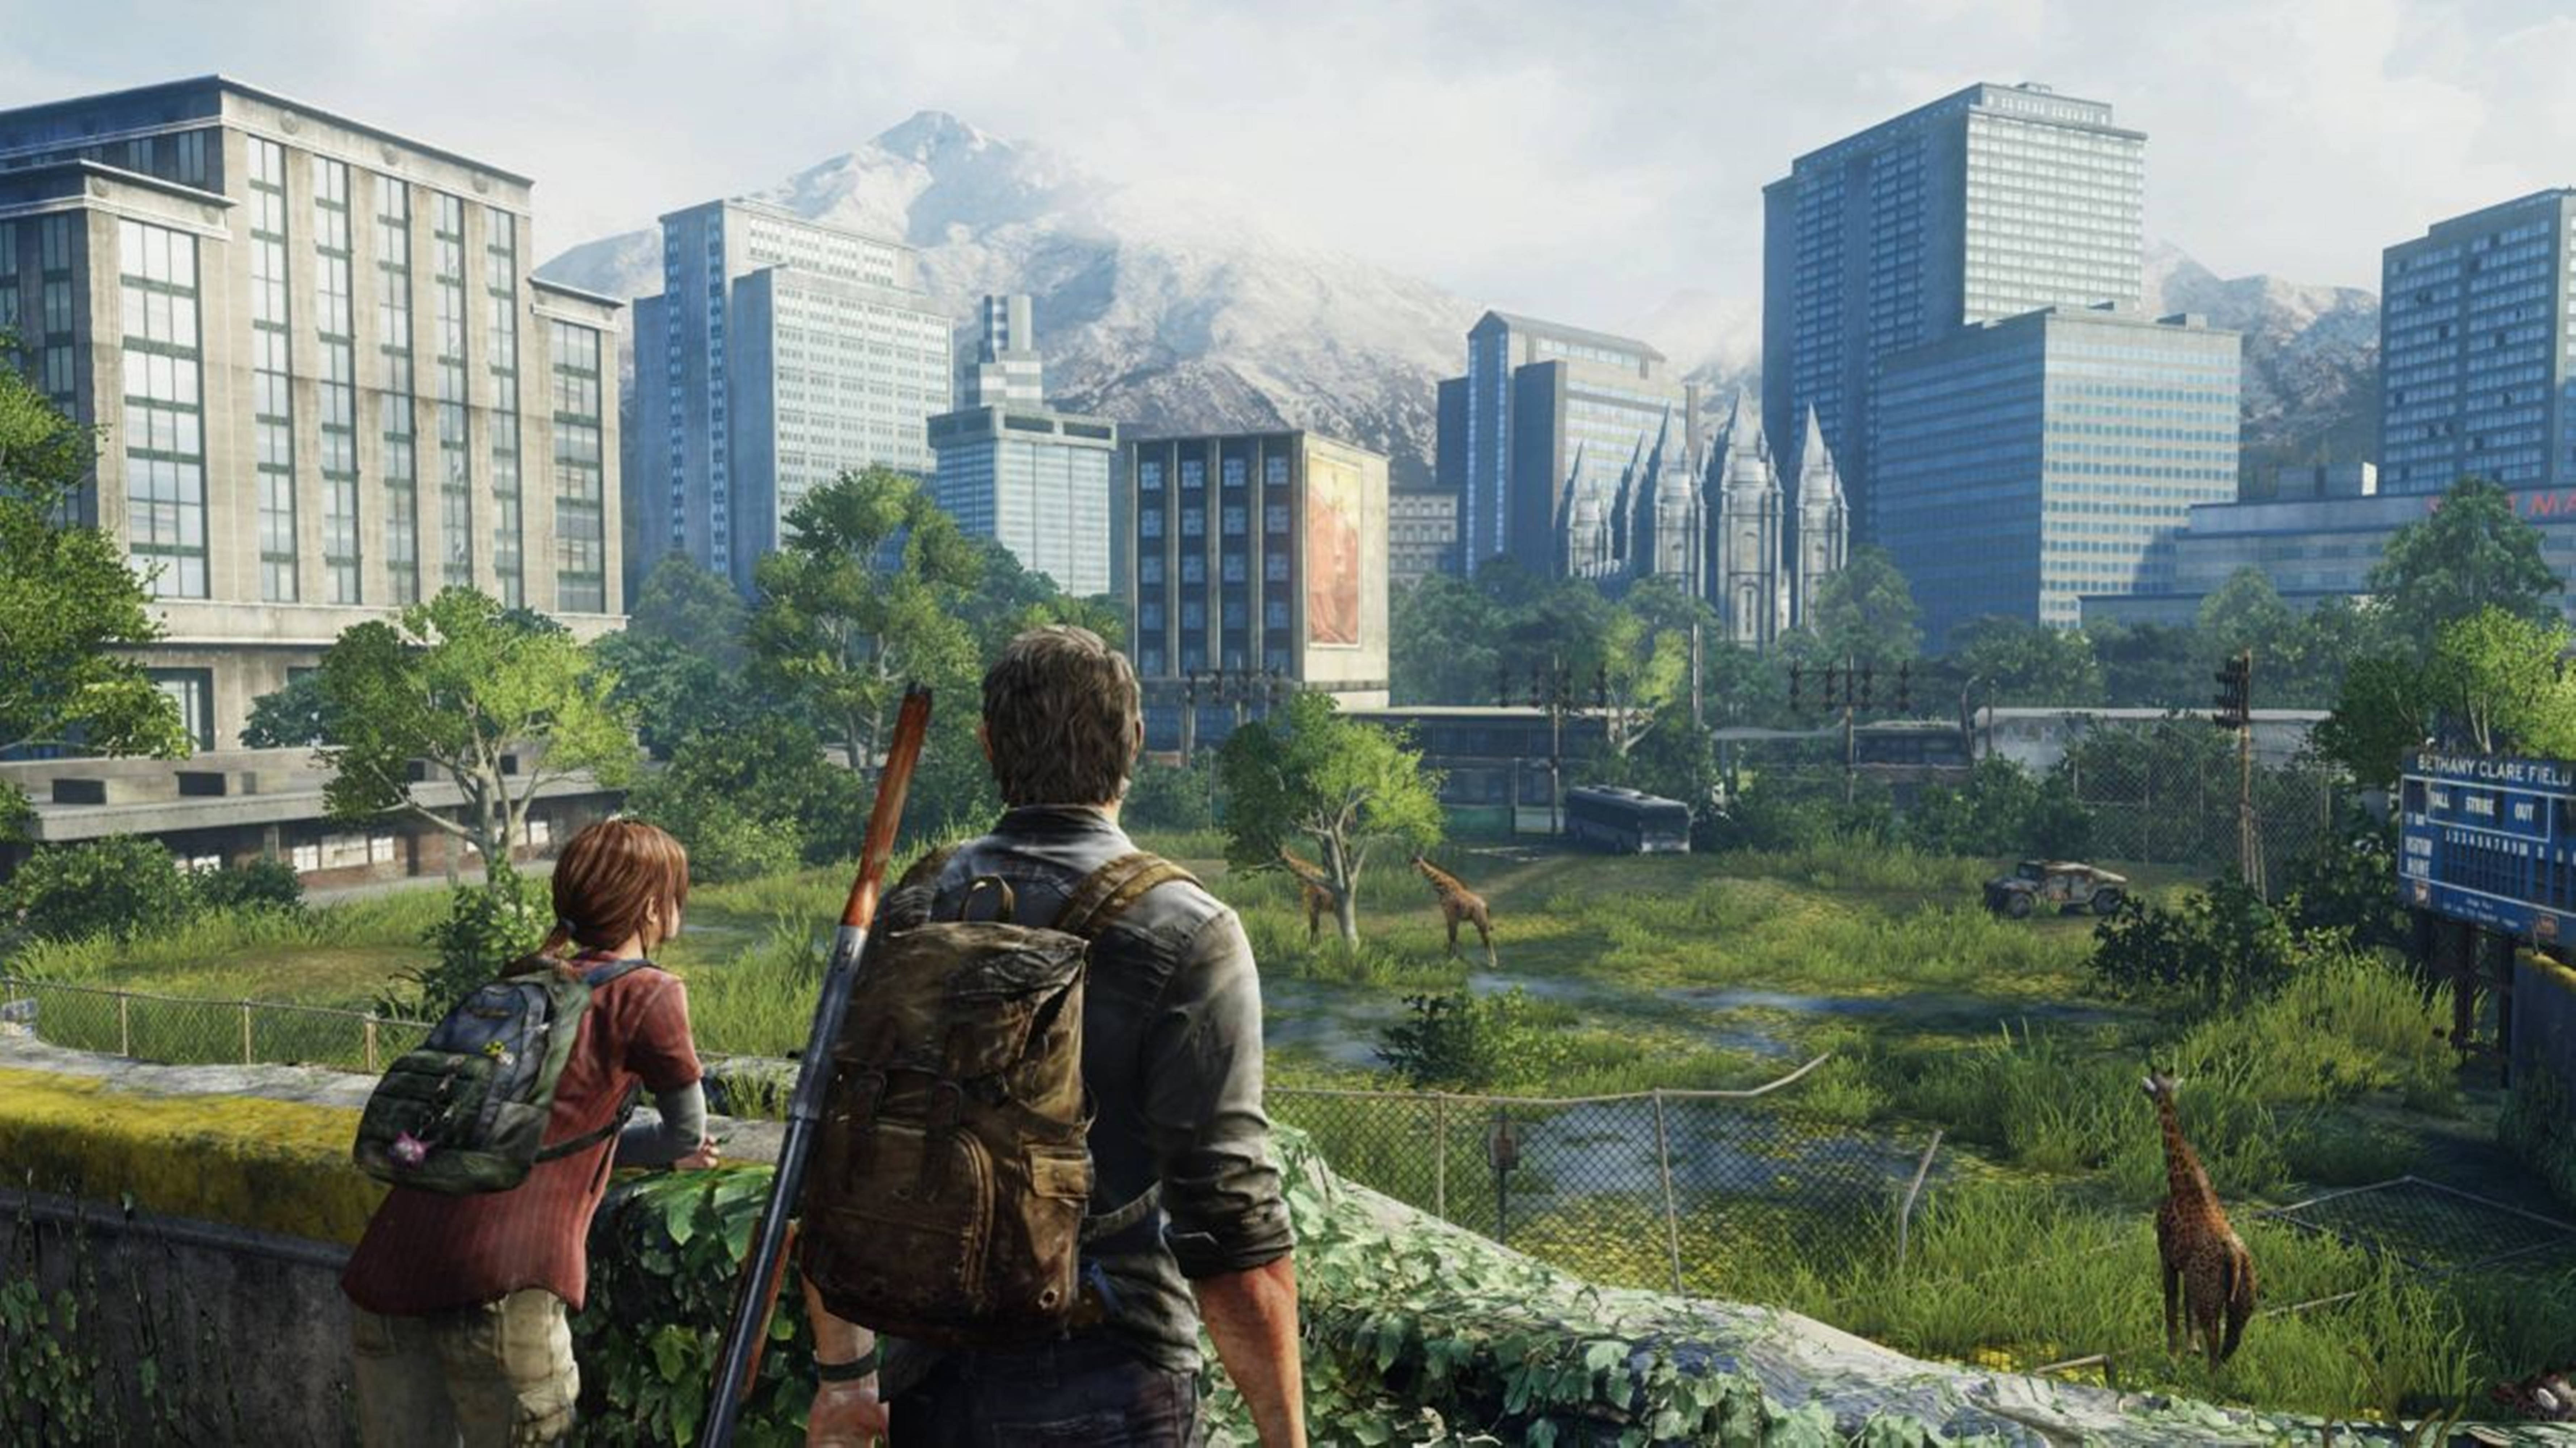 She to live there last year. The last of us 1. Джоэл the last of us. Одни из нас (the last of us) ps4. The last of us ремейк.